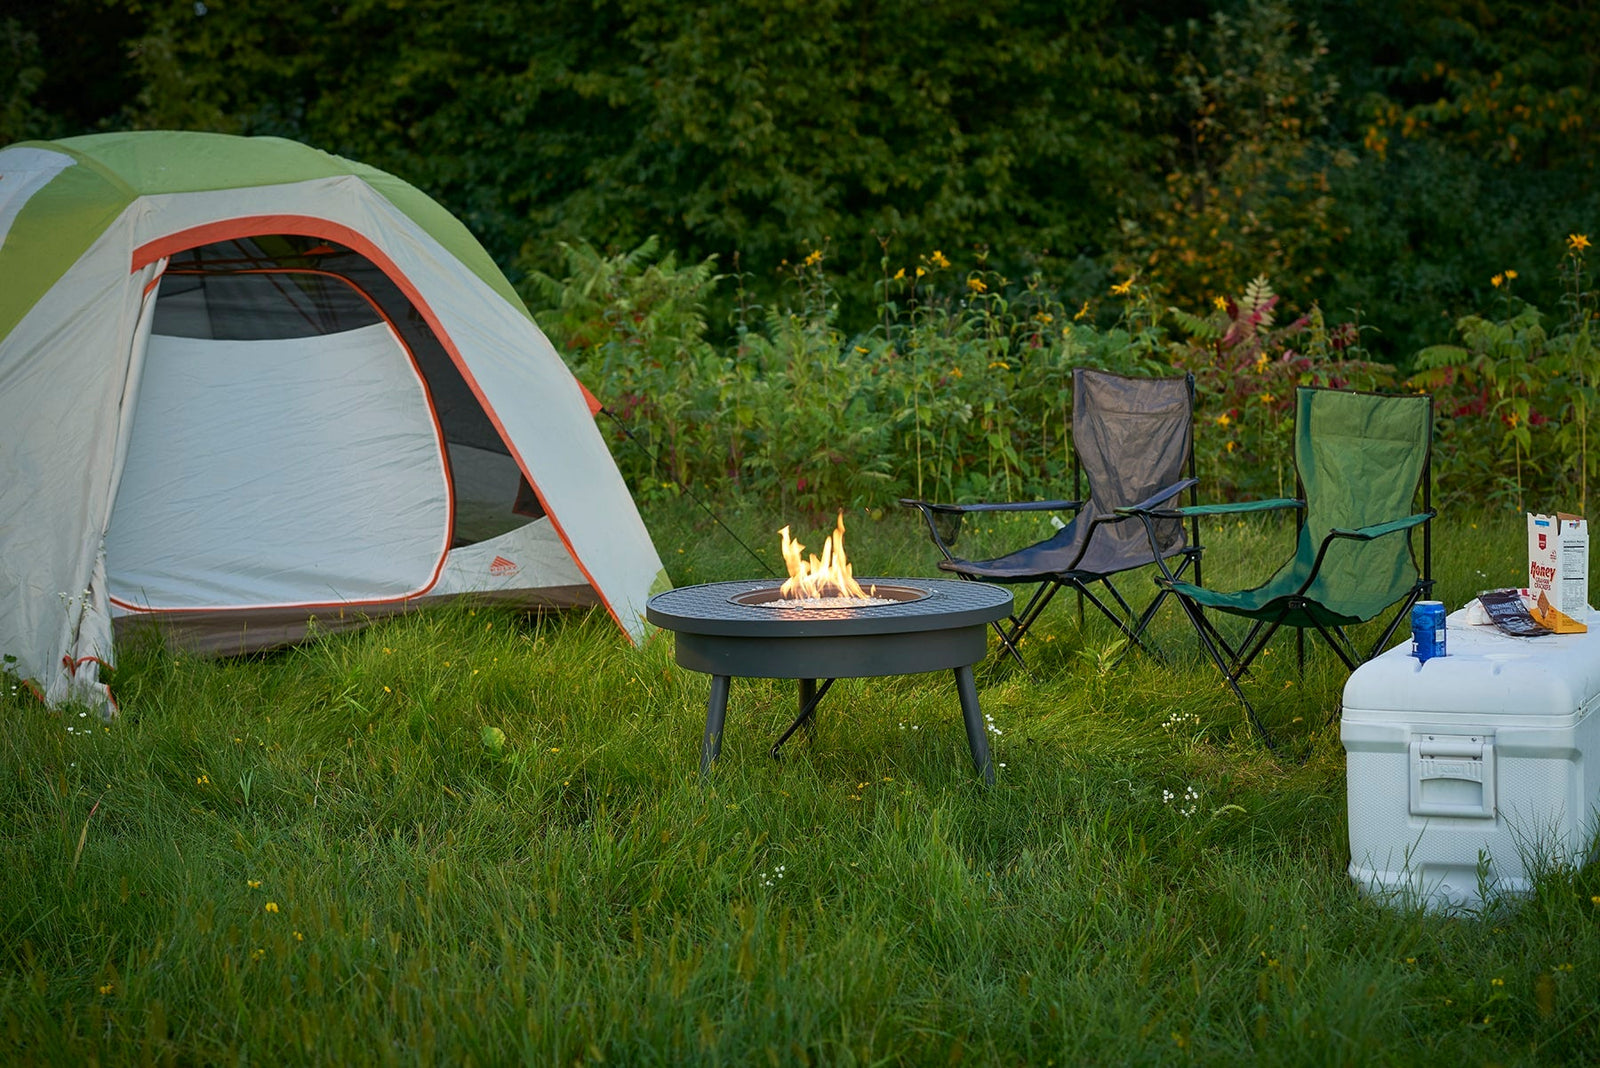 Camping Guide: Tips for a Successful Trip